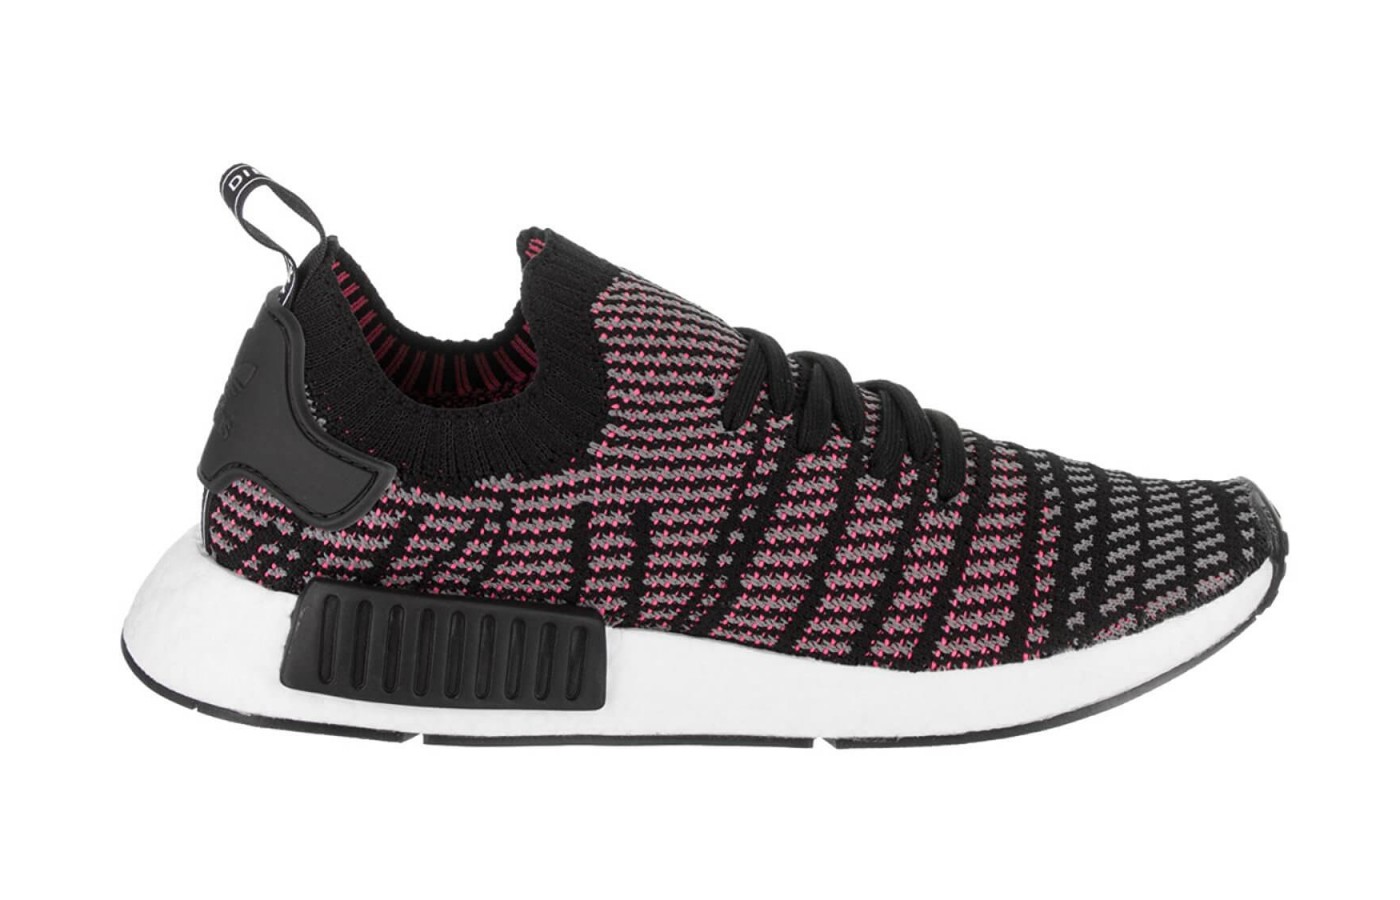 The Adidas NMD R1 Stlt Primeknit features a Boost midsole